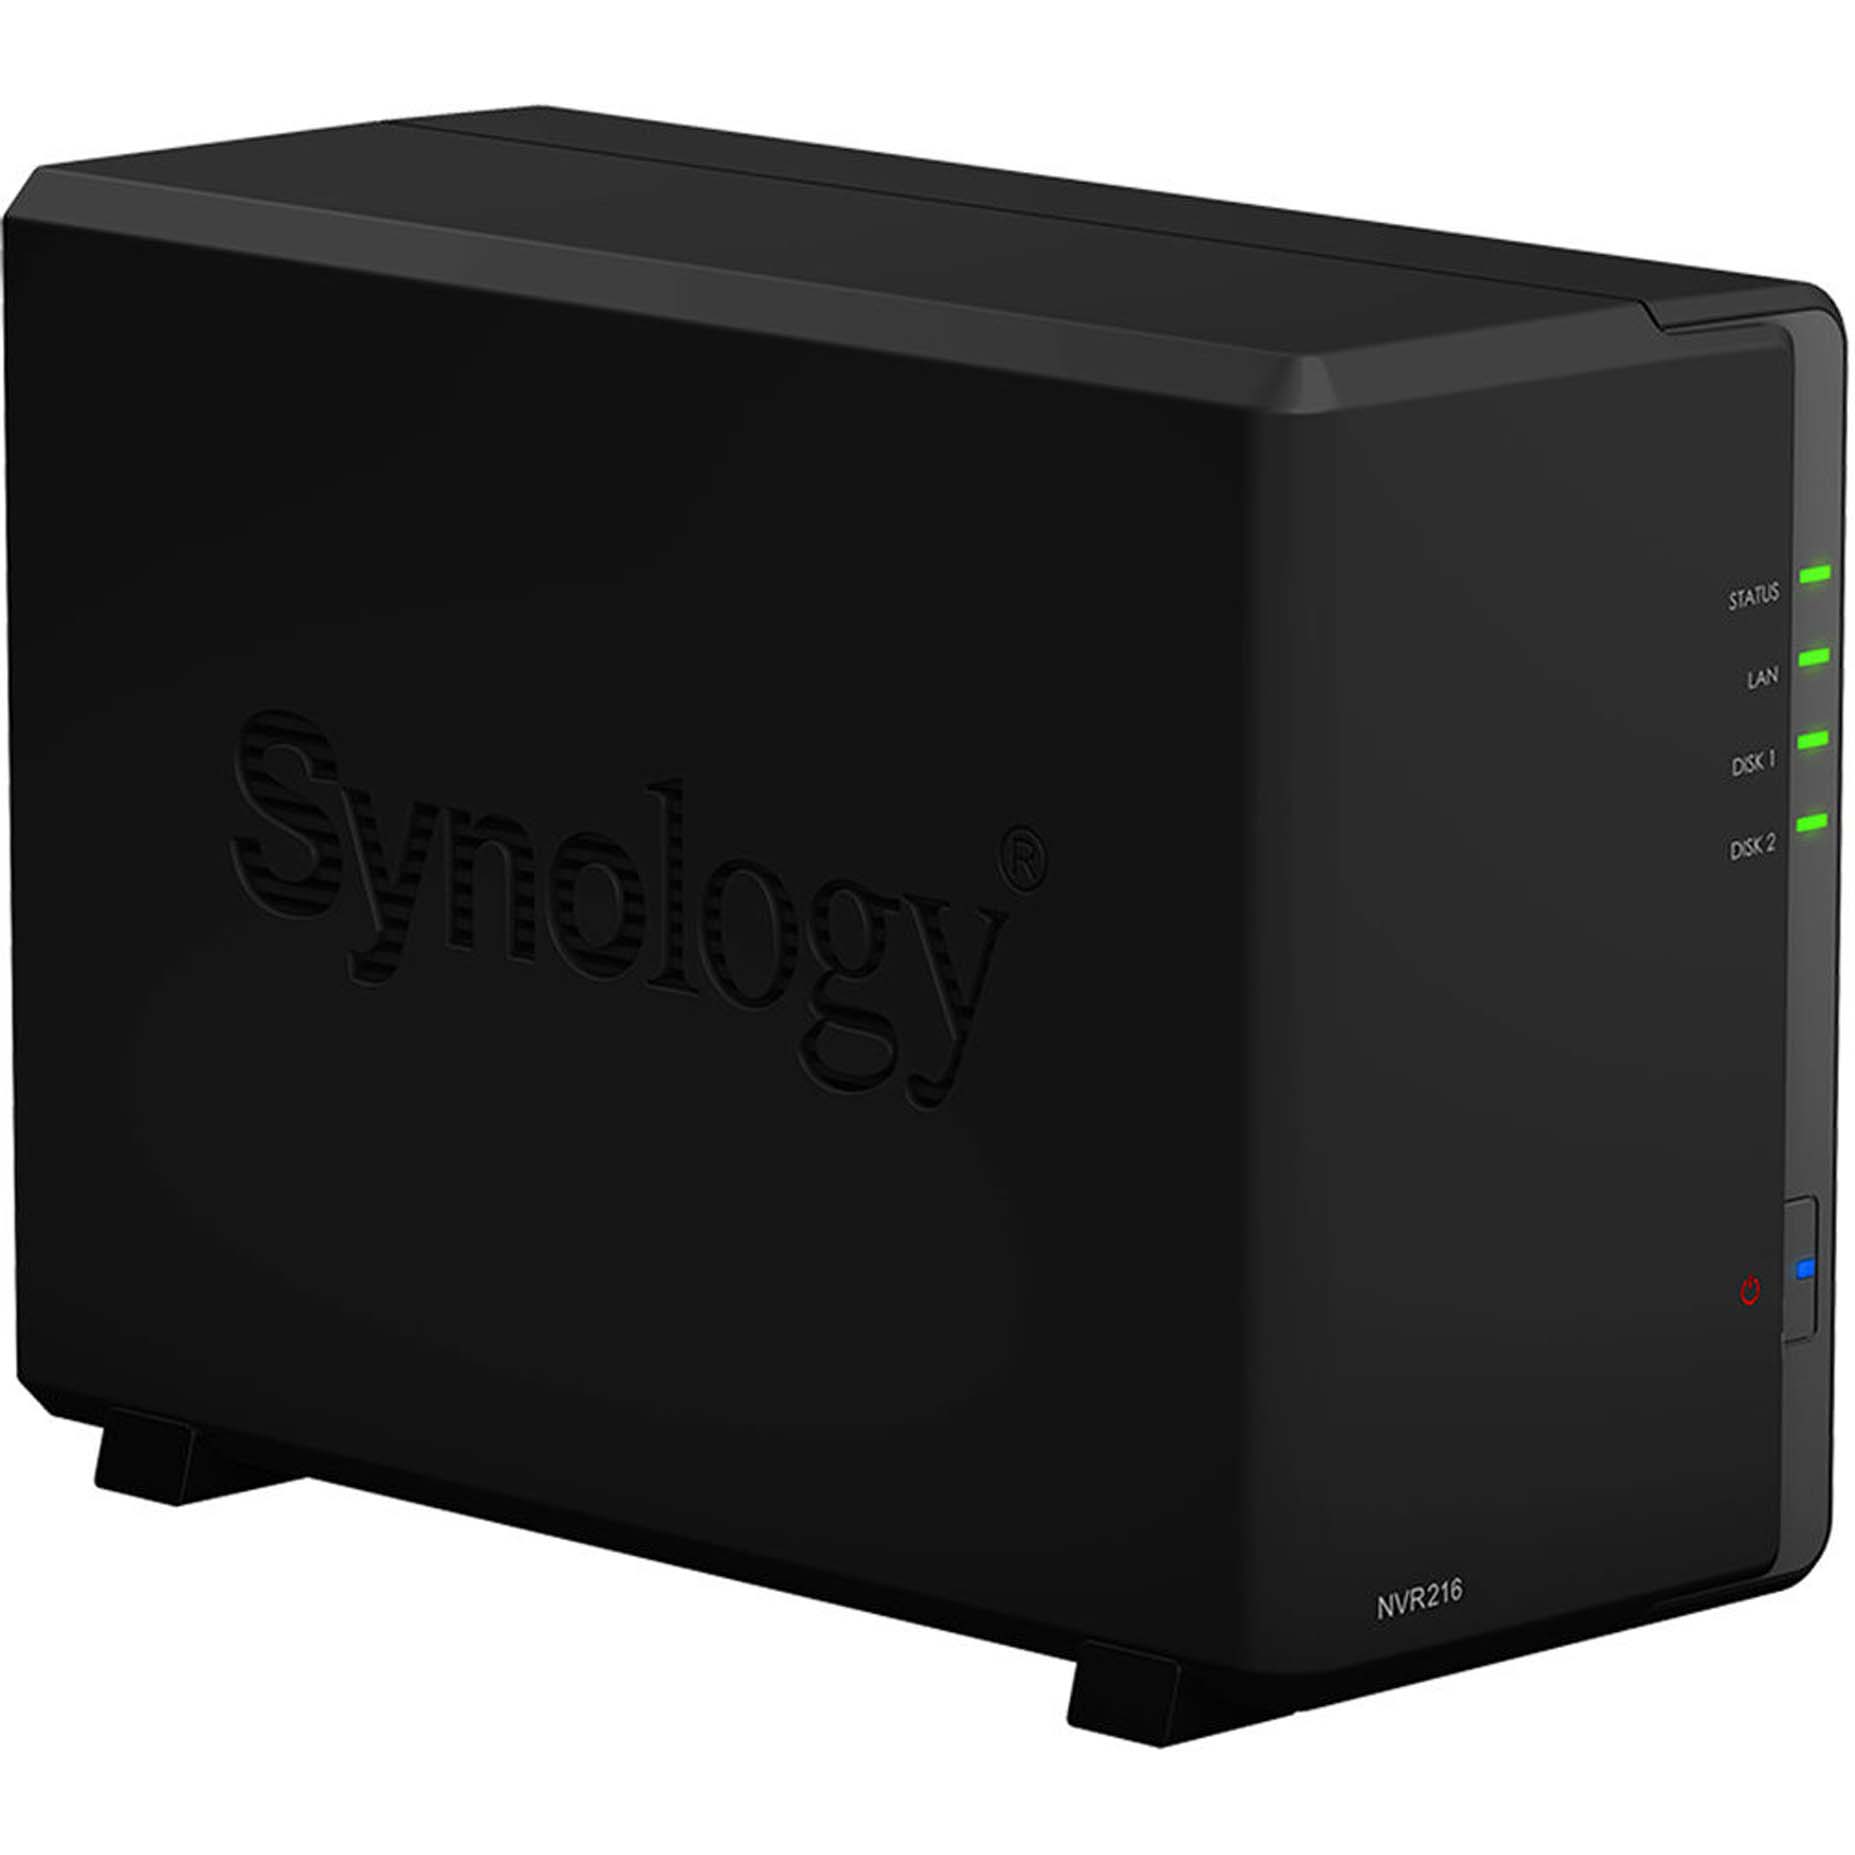 Harga Jual Synology NVR216-4CH Network Video Recorder